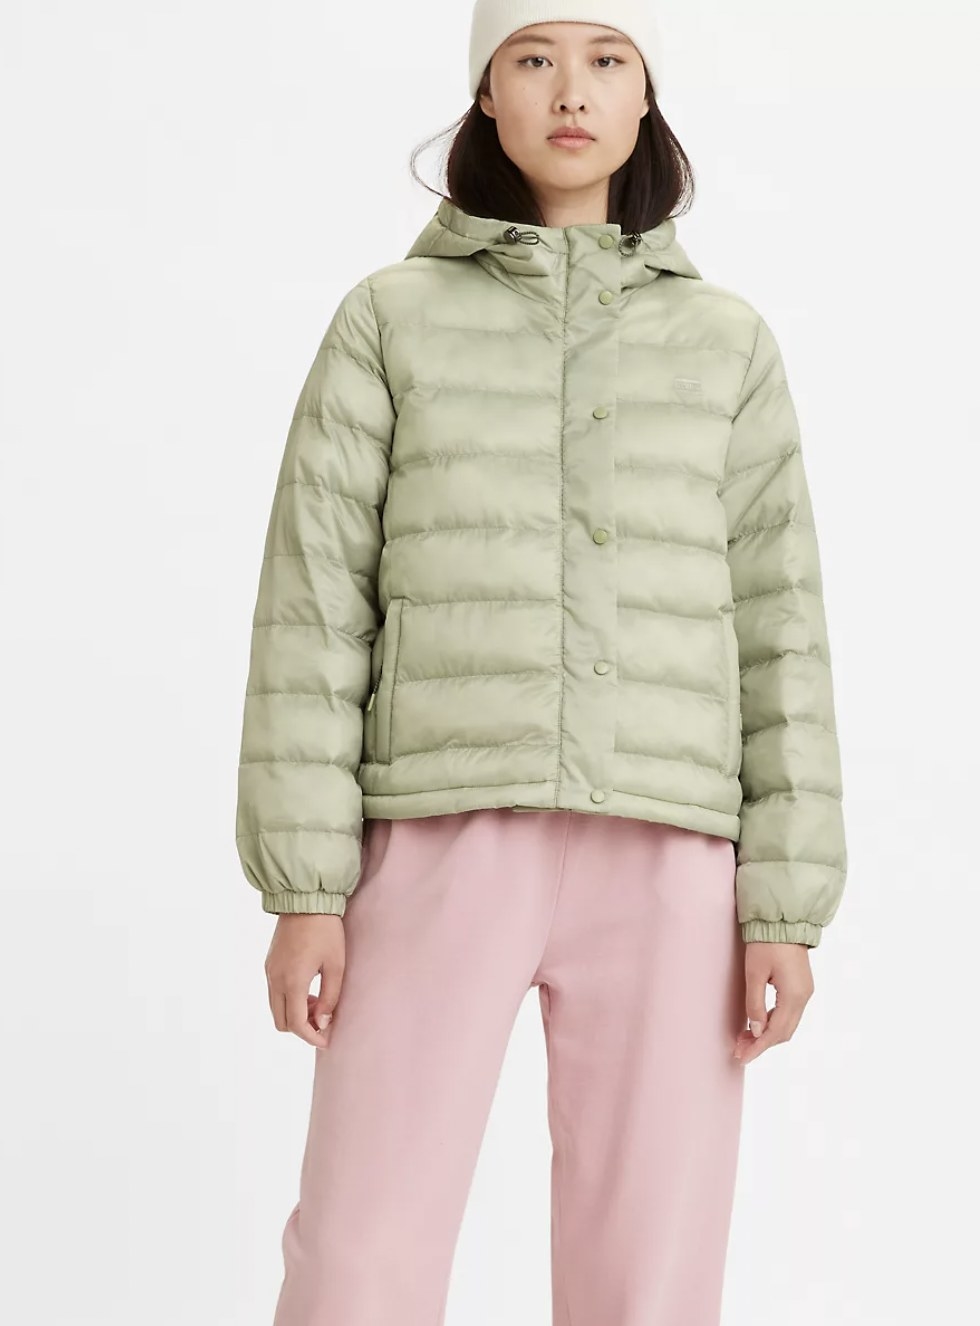 Model wearing the light green puffy jacket featuring button-closures, side pockets and hood